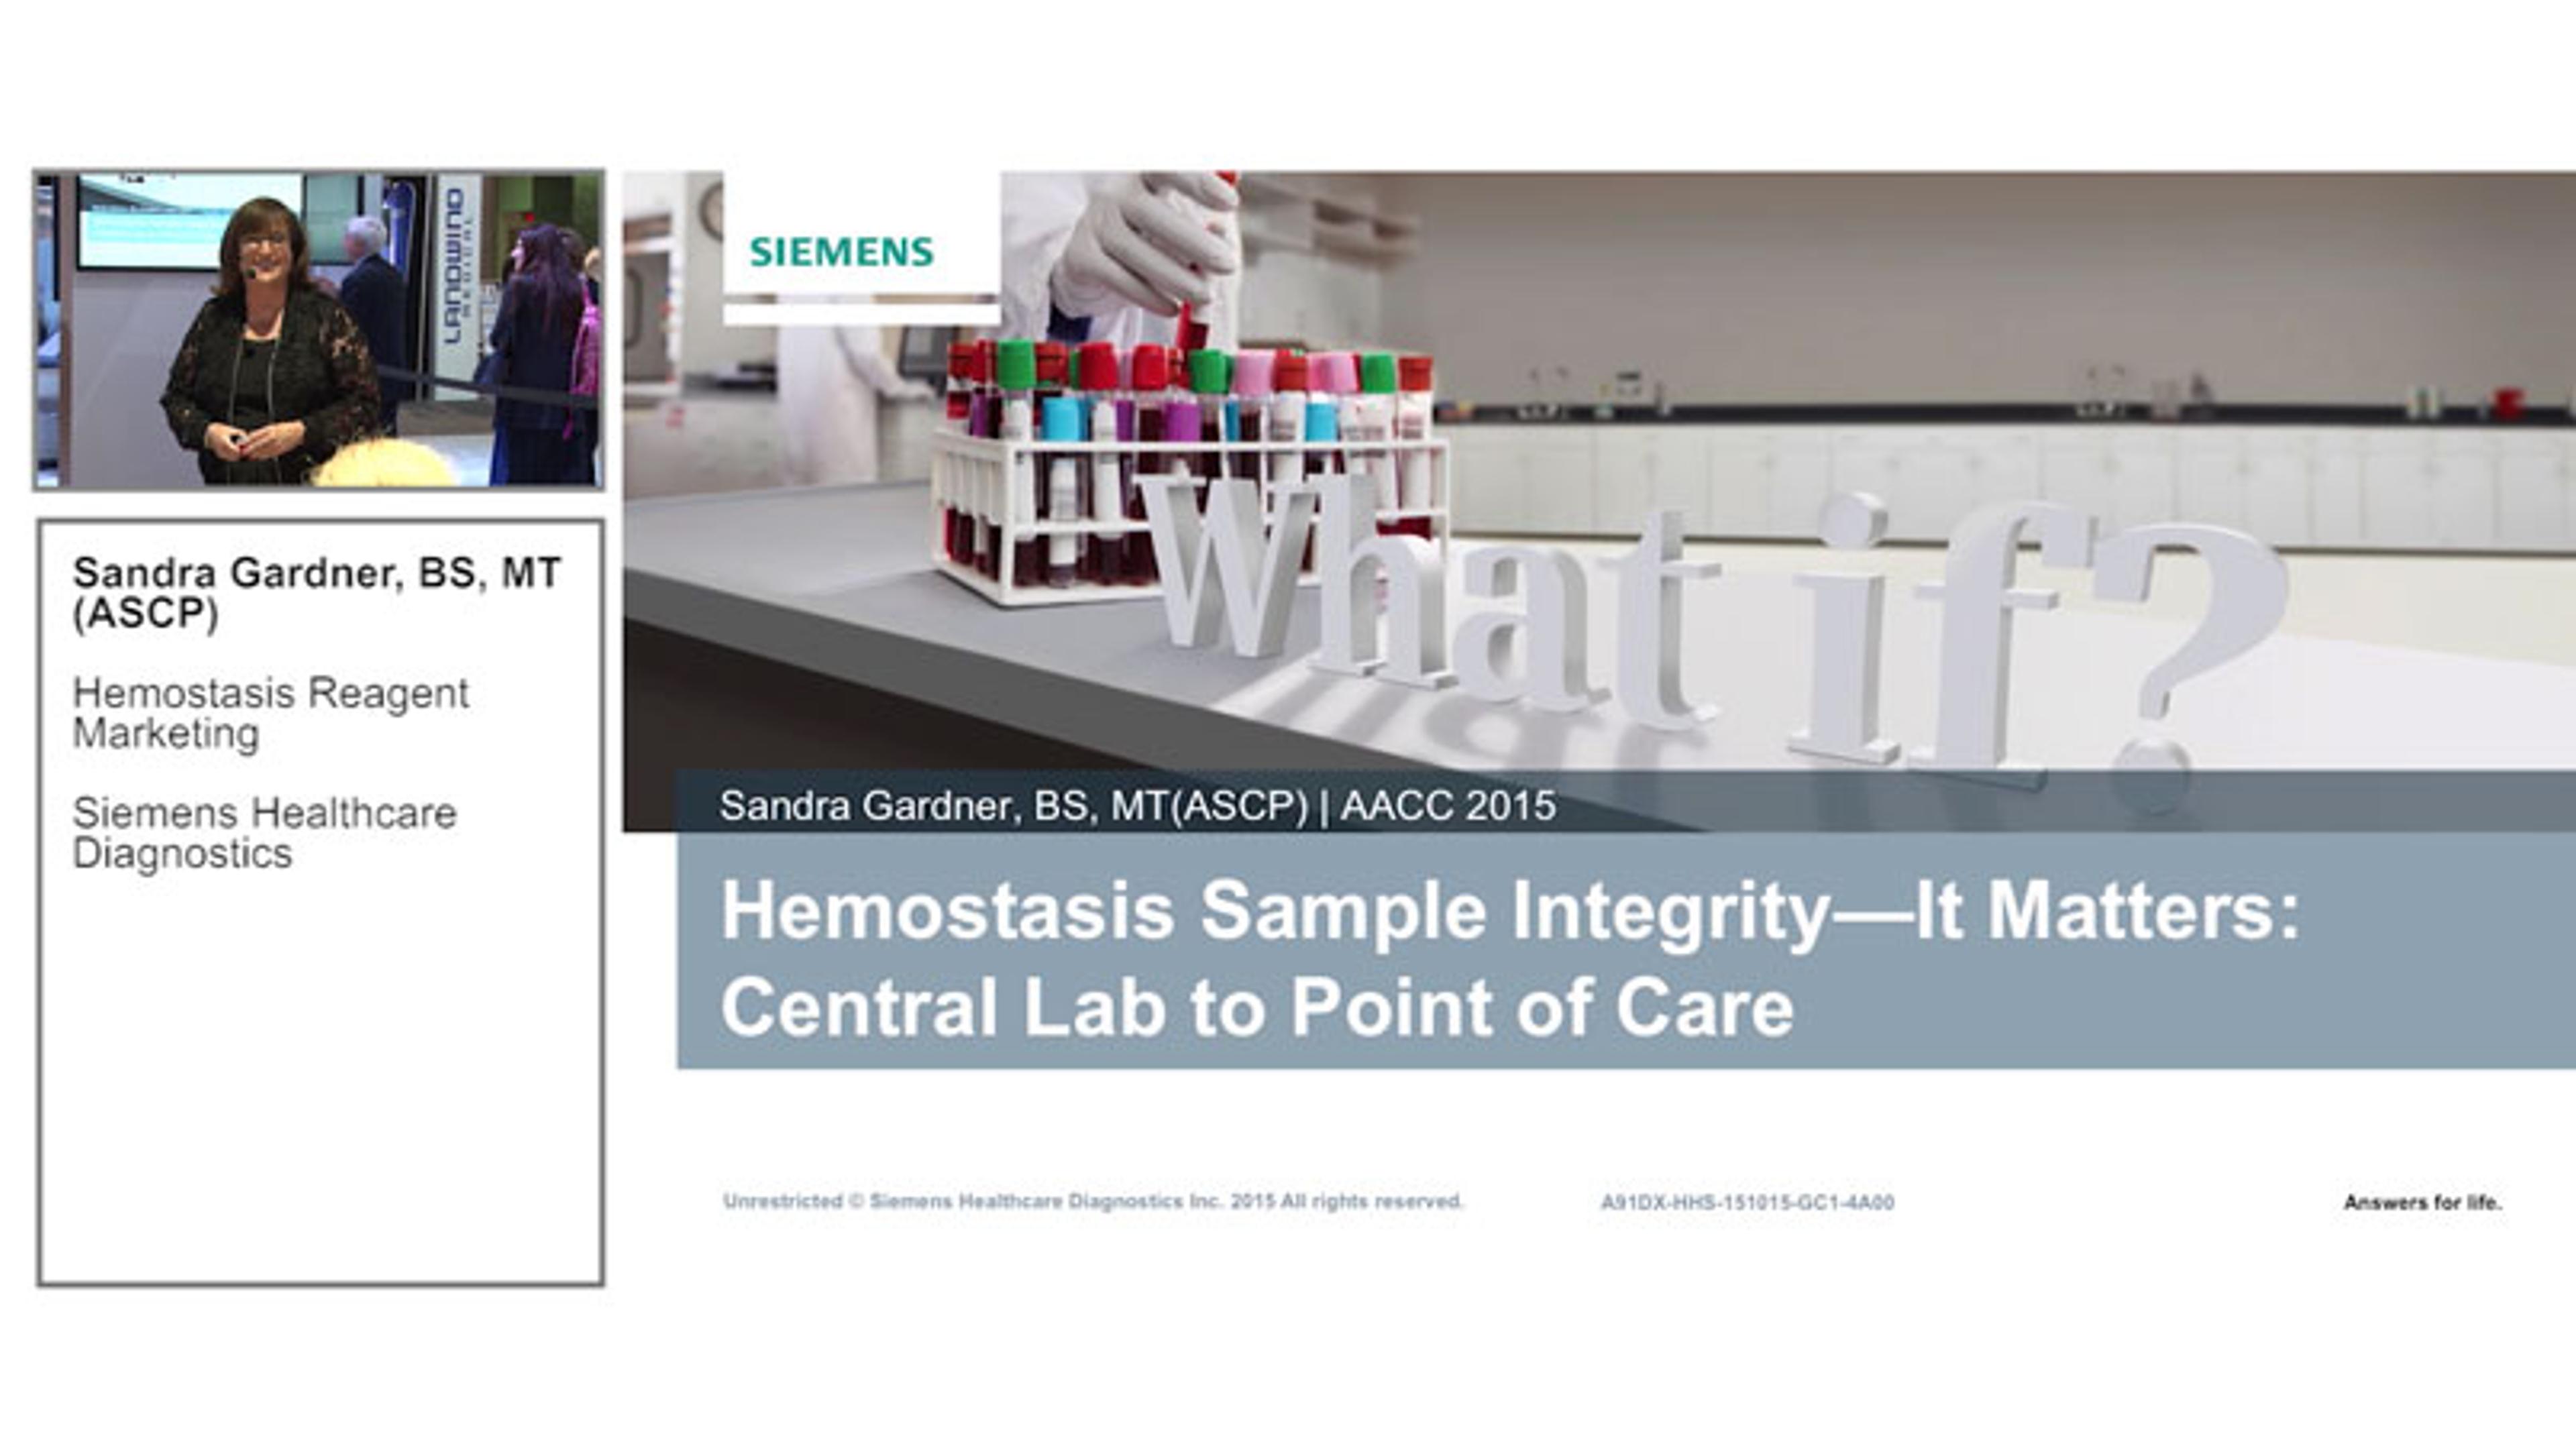 Hemostasis Sample Integrity - It Matters:  Central Lab to Point of Care